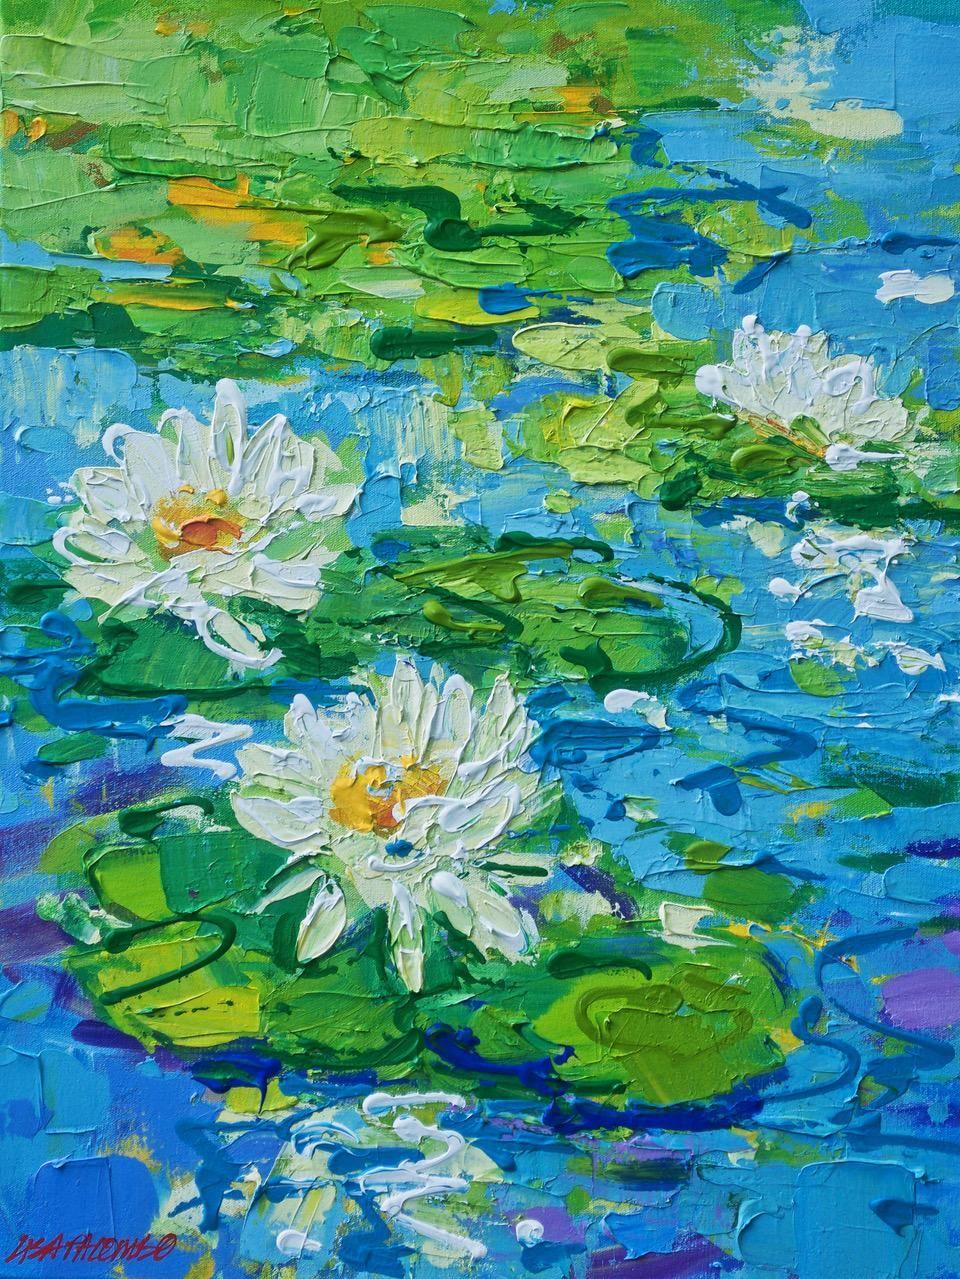 Lisa Palombo, "Floating Jewels #5", Lily Pond Painting on Canvas, 2018